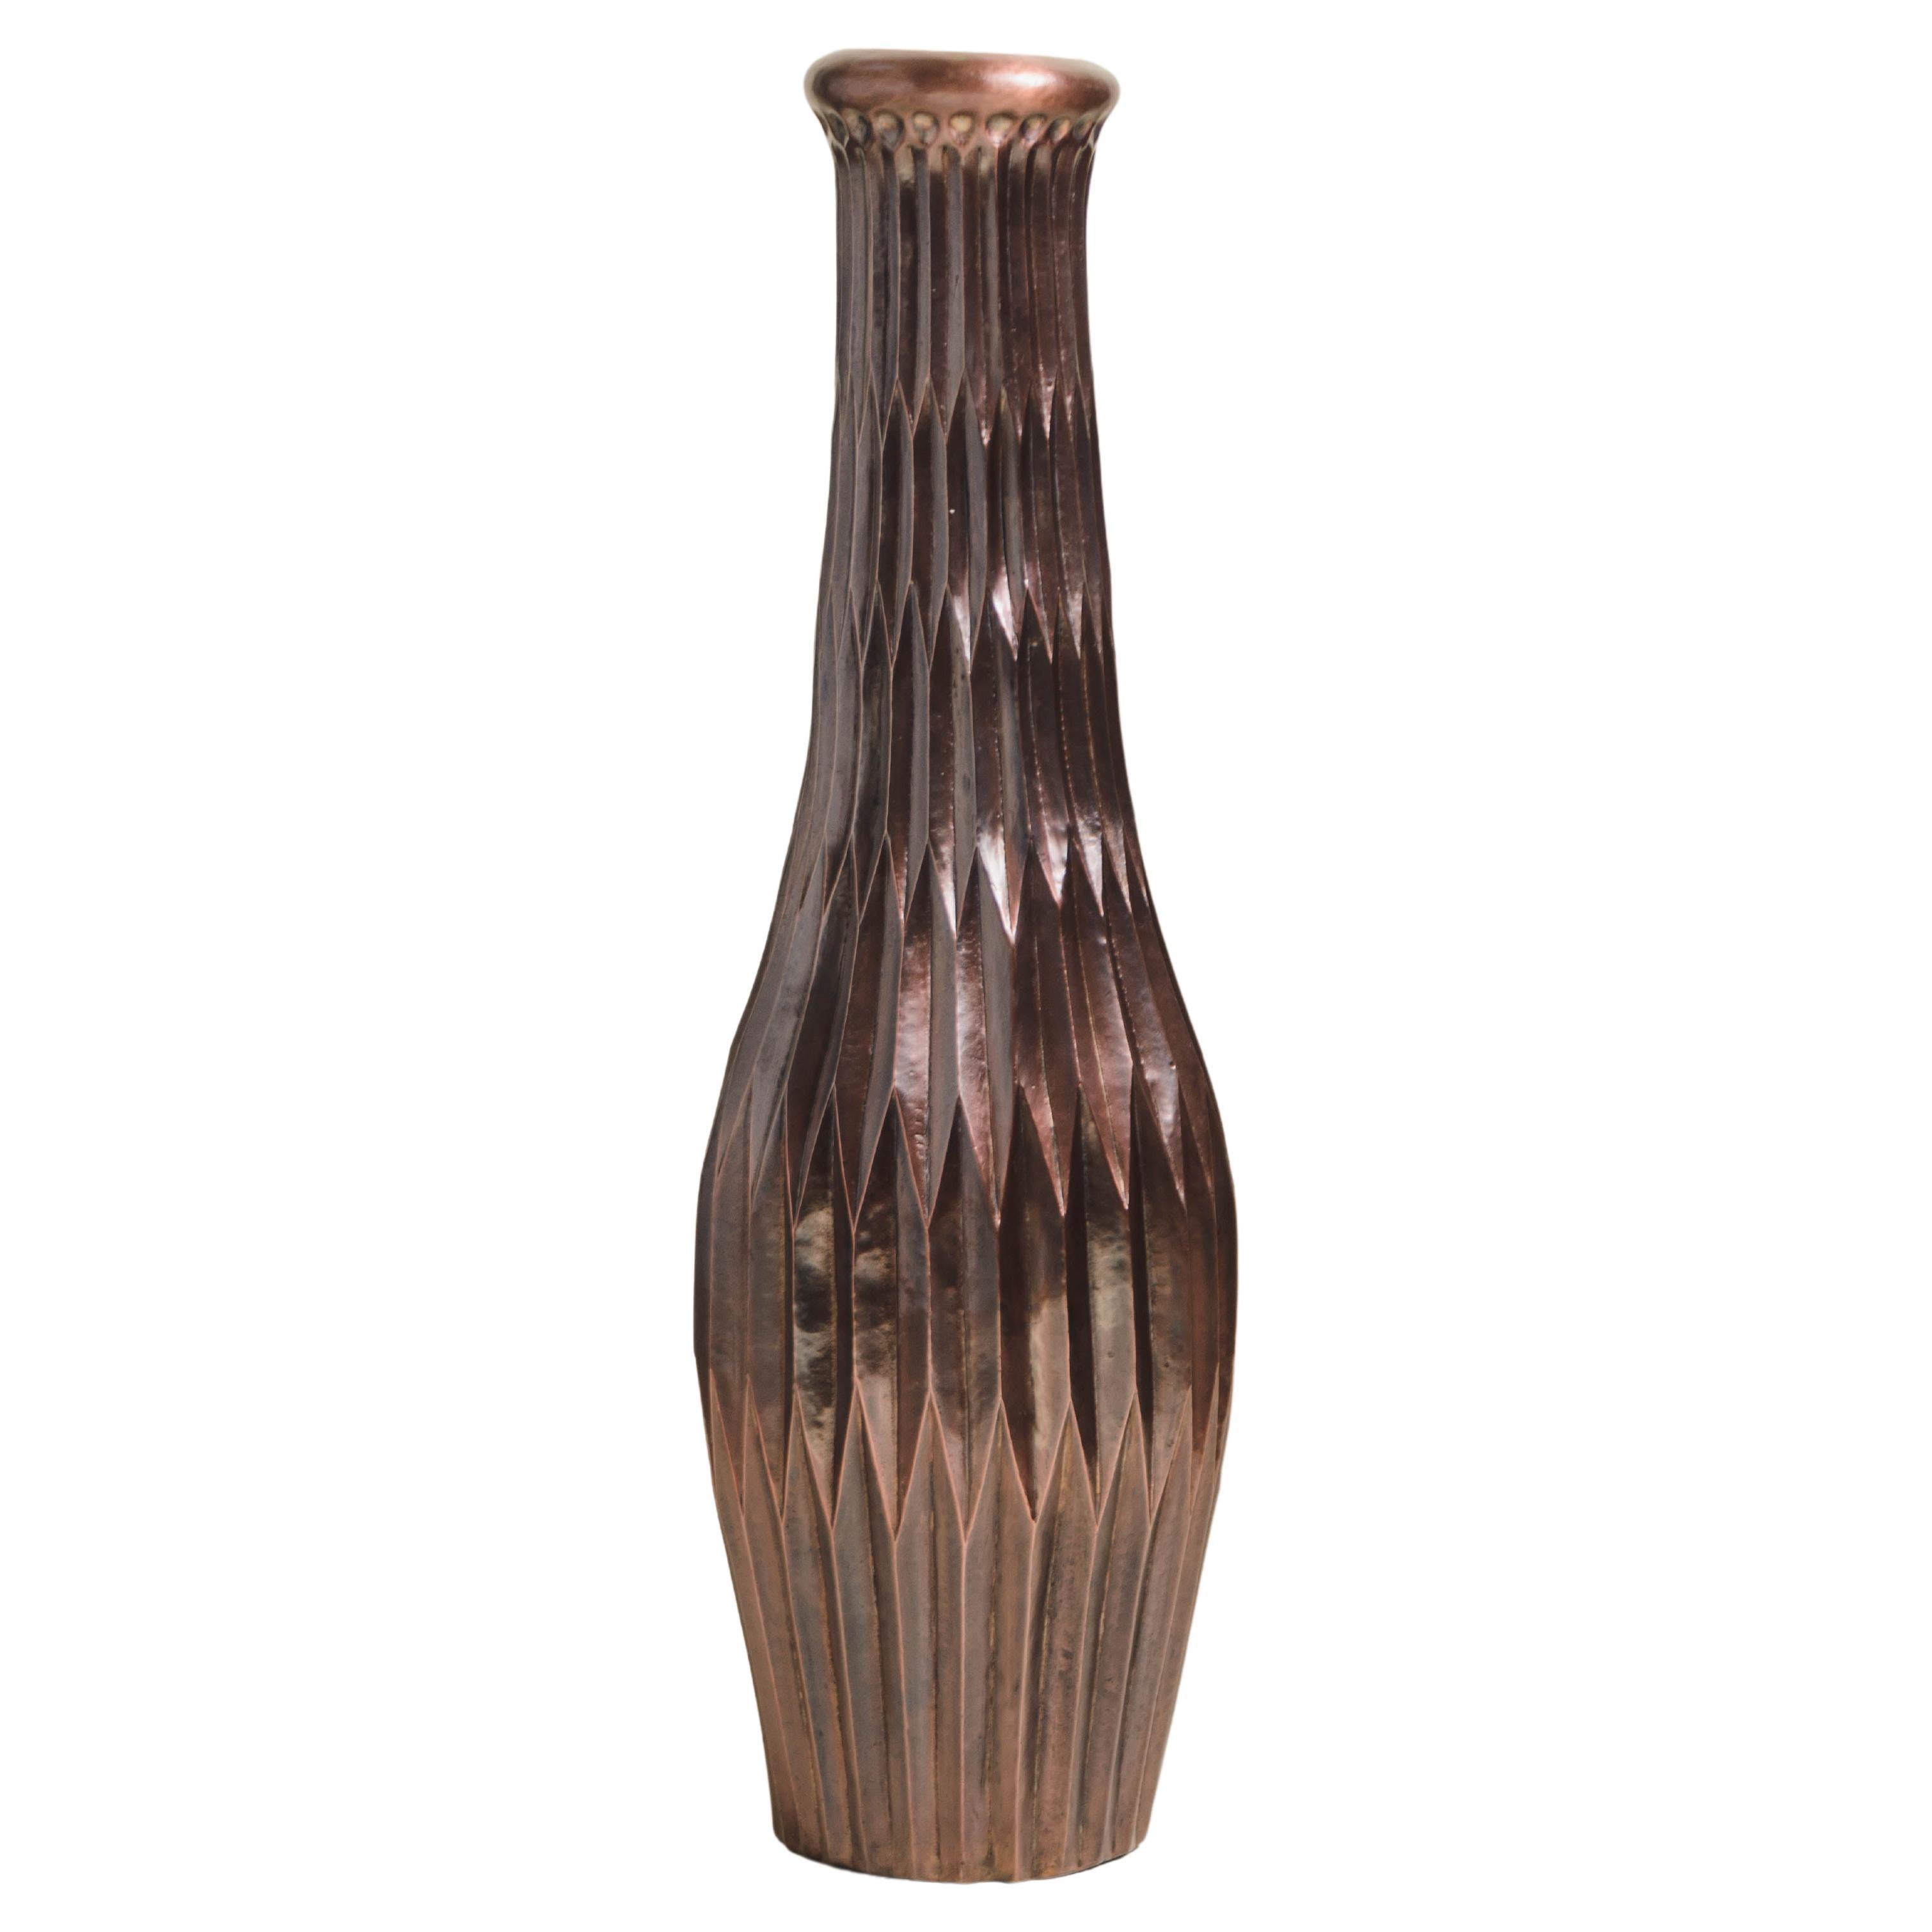 Contemporary Repoussé Tall Lantern Design Vase in Antique Copper by Robert Kuo